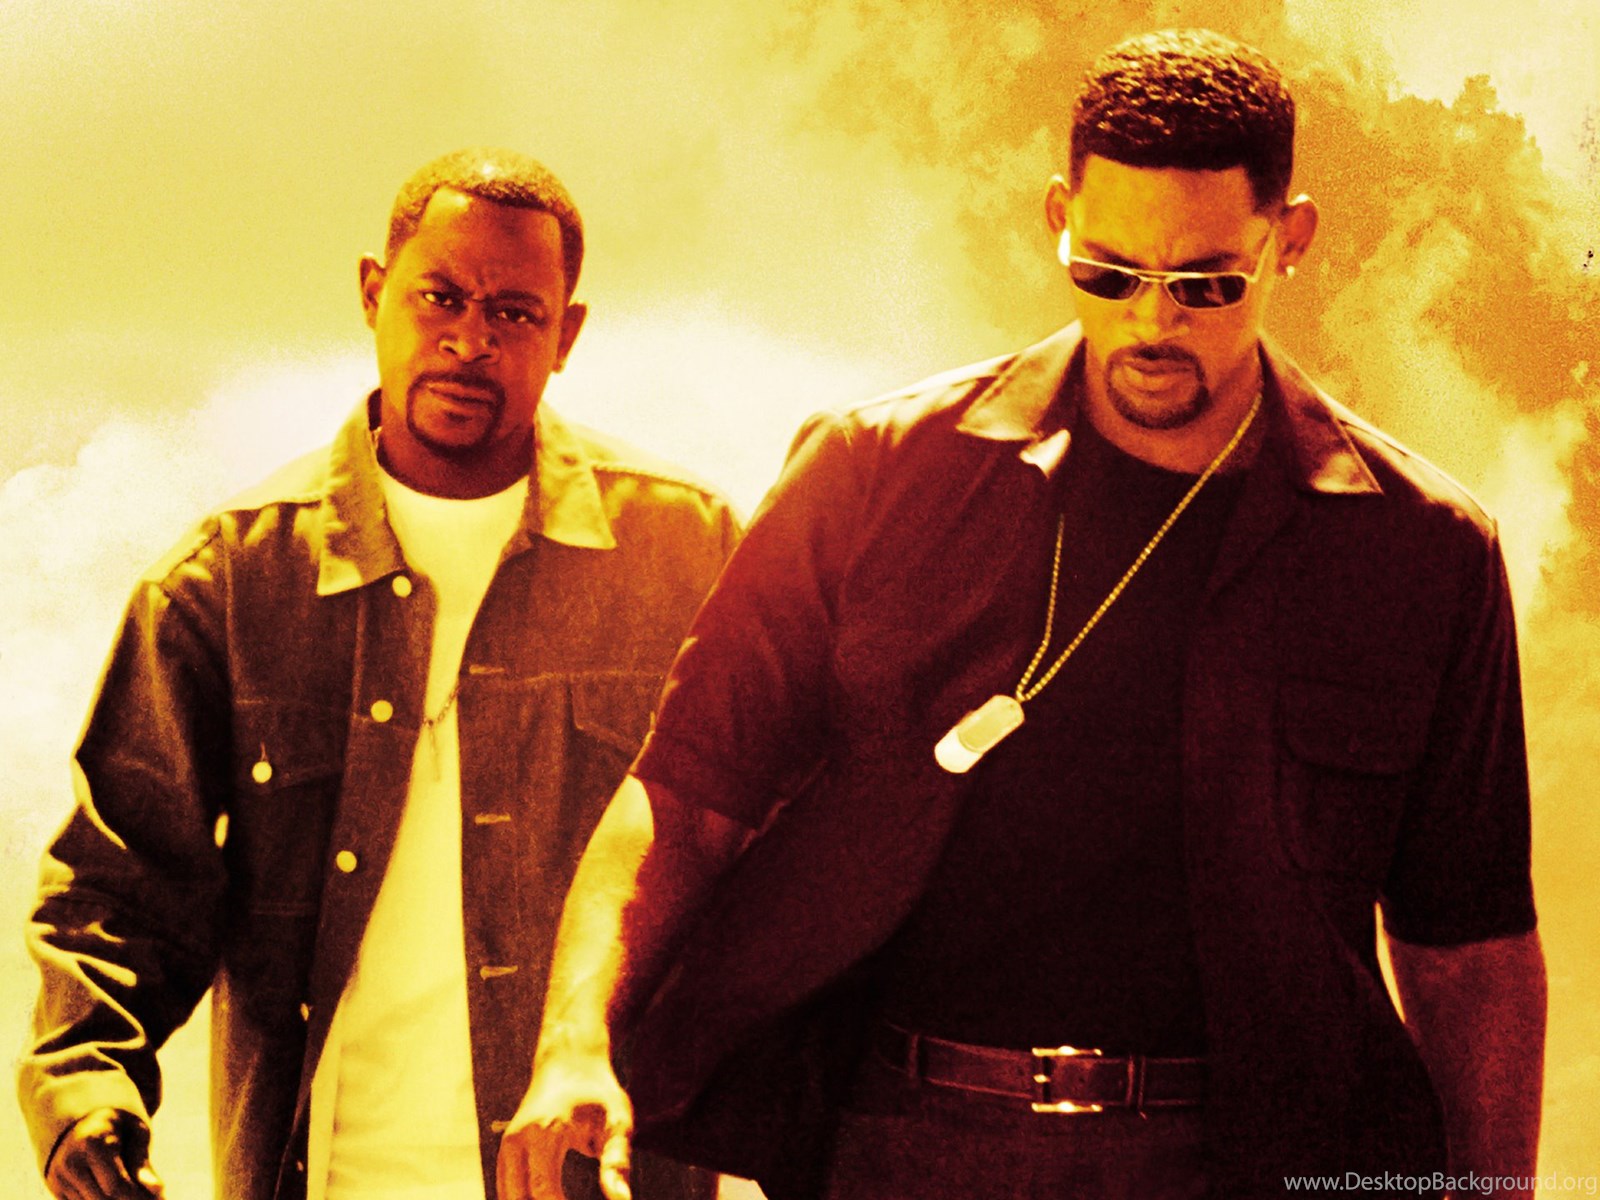 Download Download Wallpapers Bad Boys, Bad Boys, Will Smith, Will Smith ......